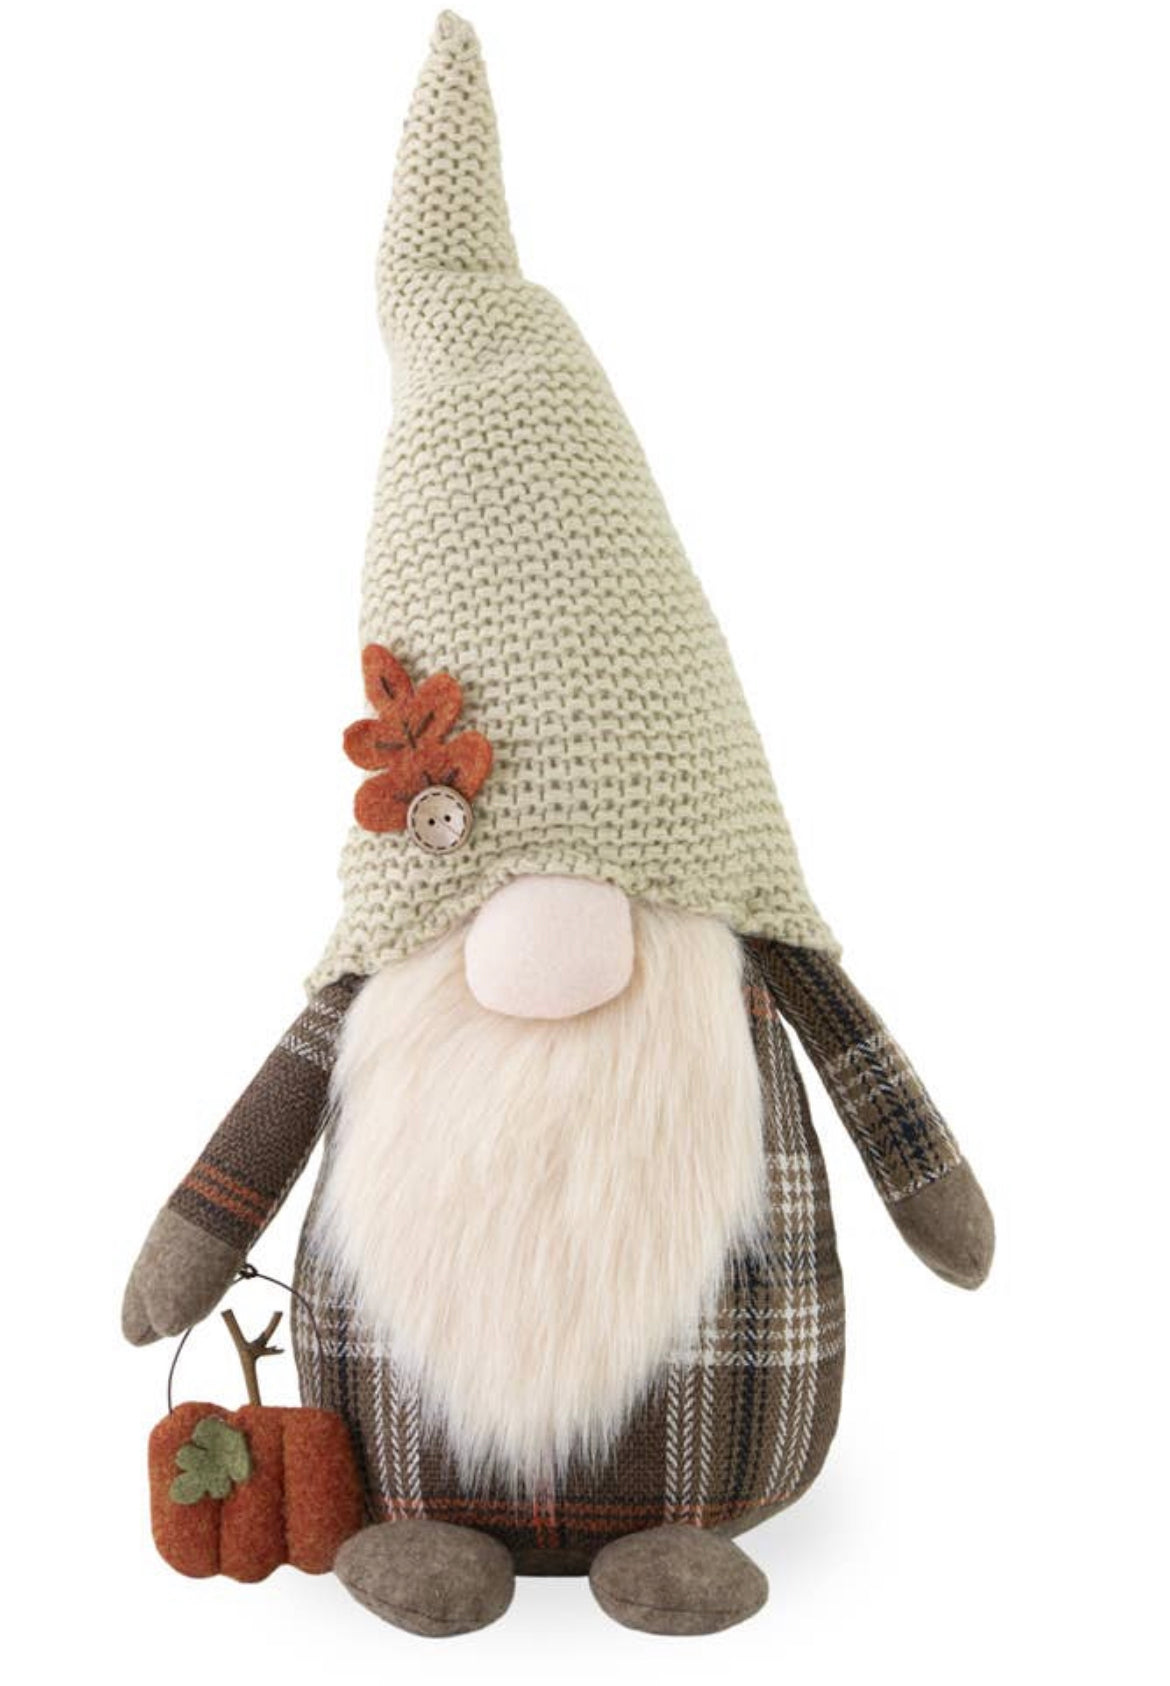 Add cute seasonal style to your decor with this Abner Autumn Plaid Gnome Figurine. Abner has a fluffy white beard, pumpkin and leaf accents, and a fun plaid outfit.